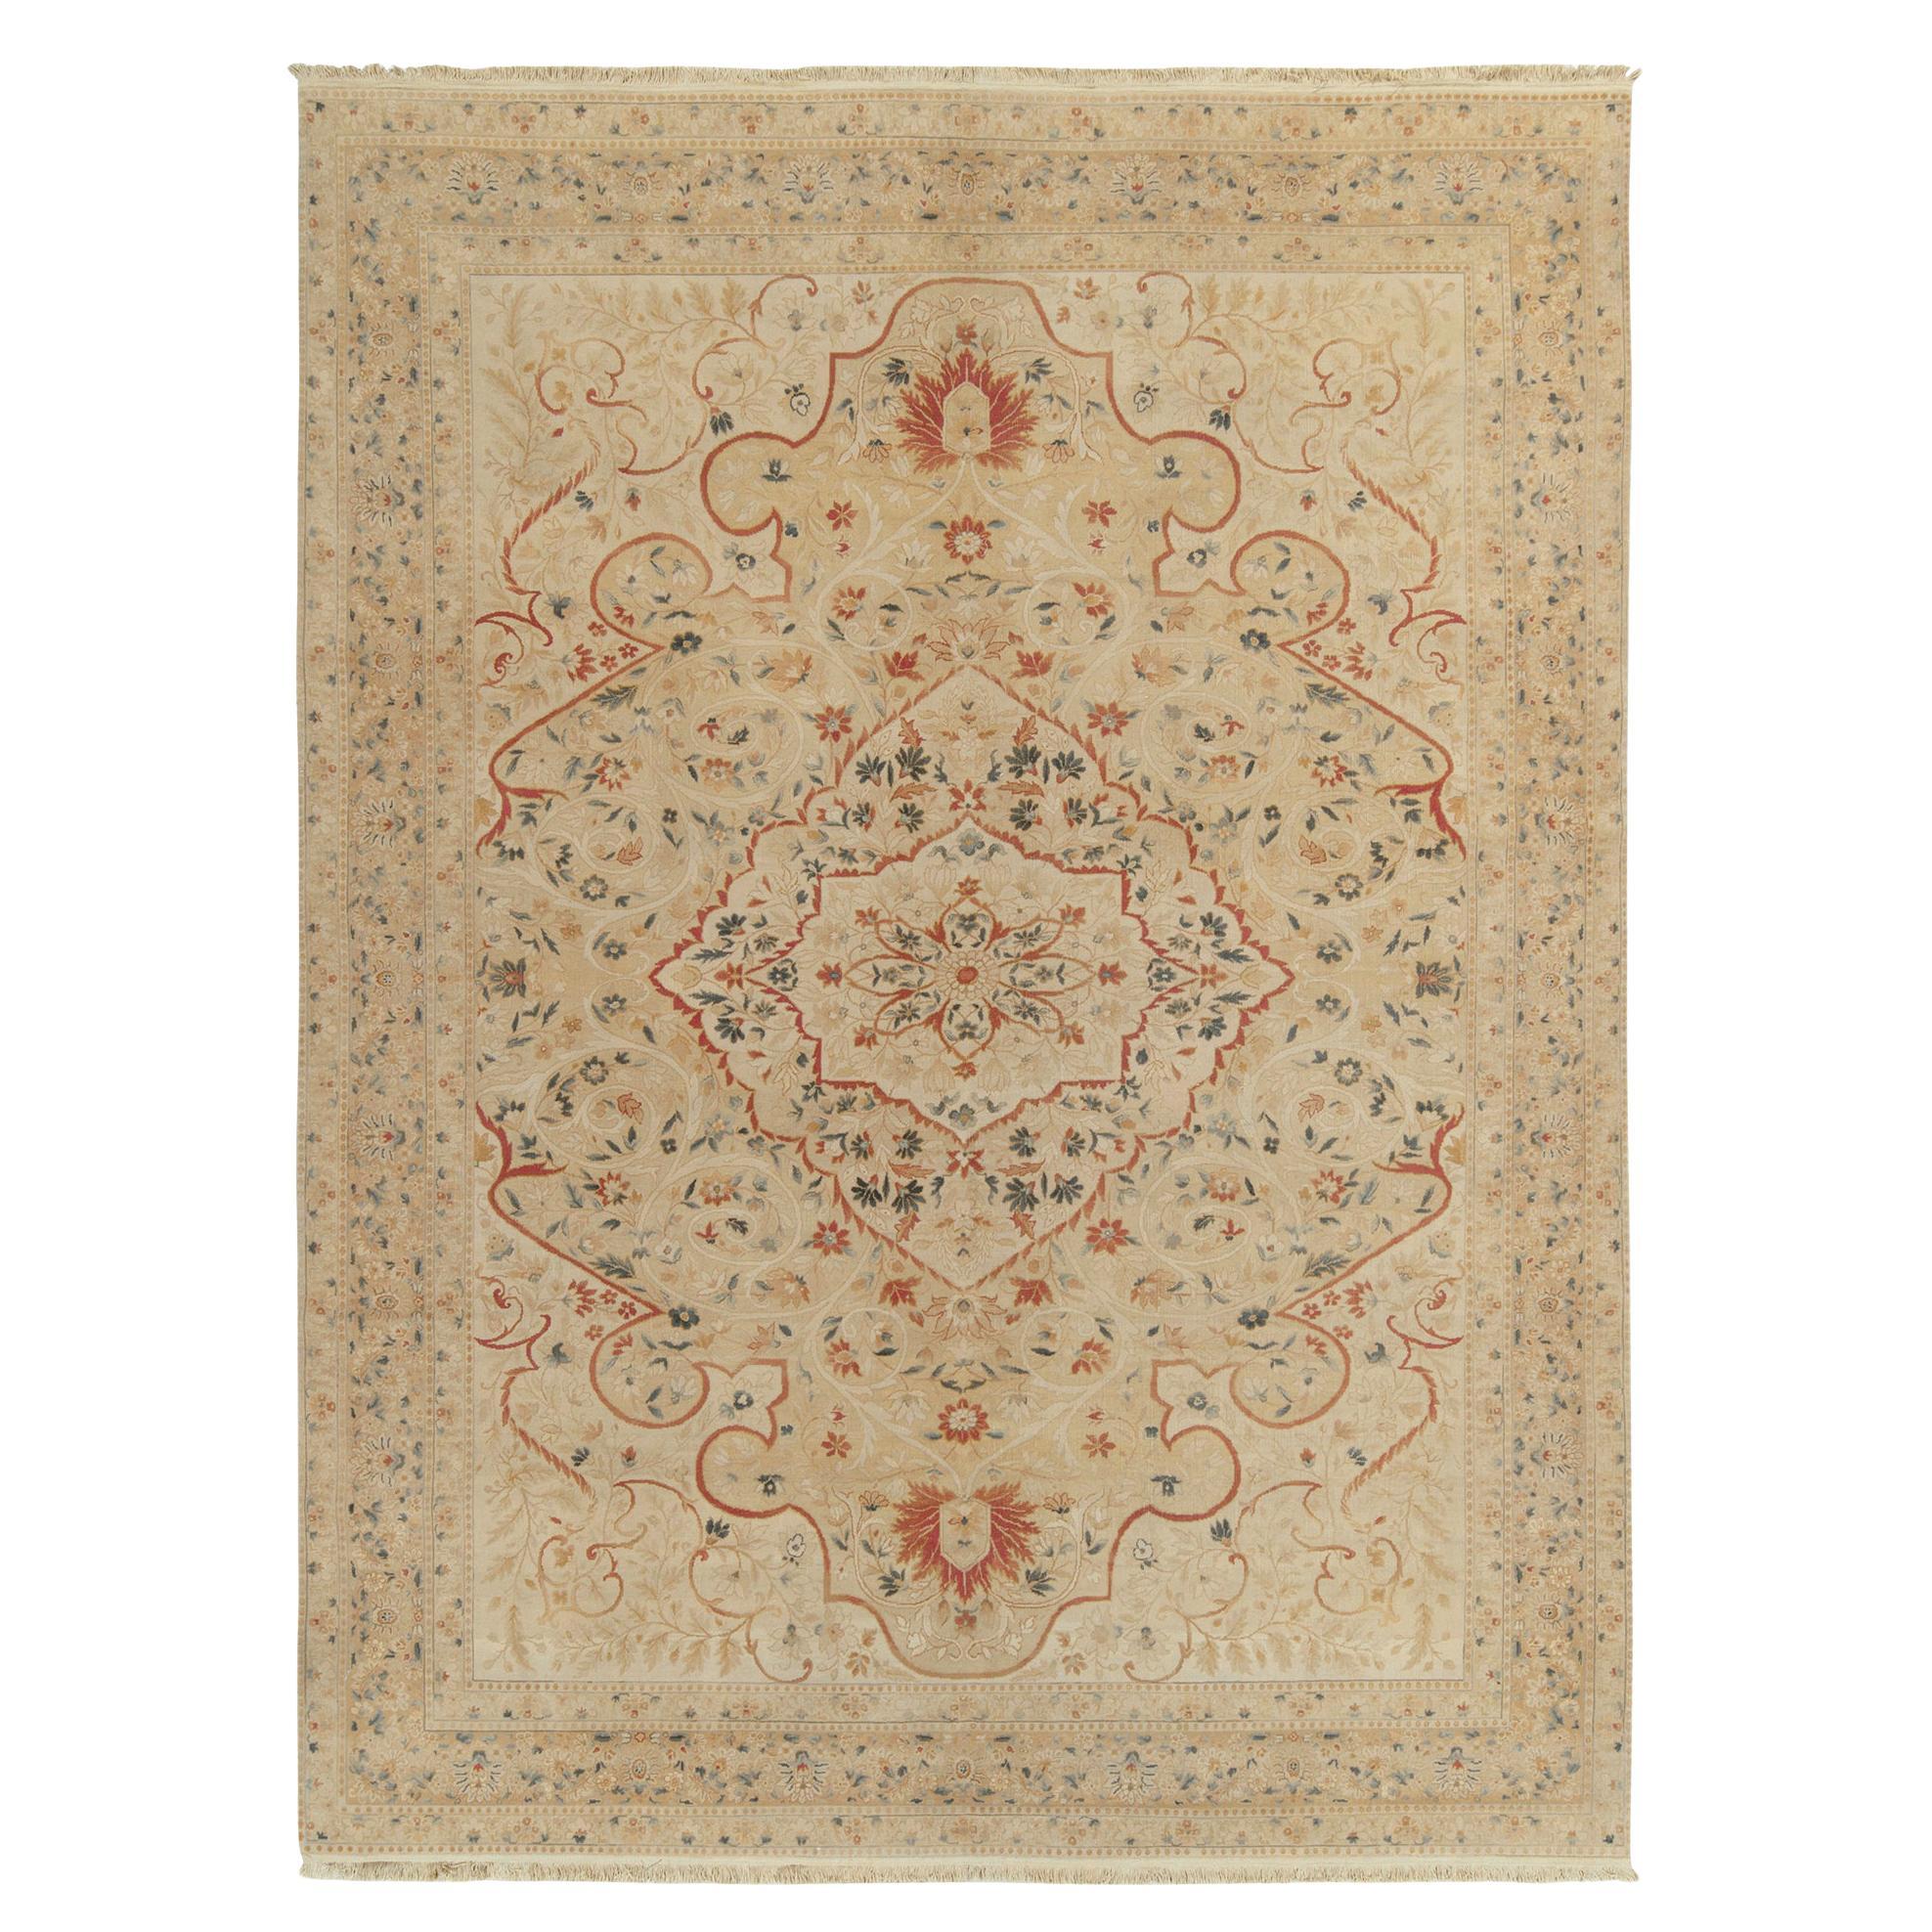 Rug & Kilim's Classic Tabriz Style Rug in Beige, Red & Green Floral Pattern